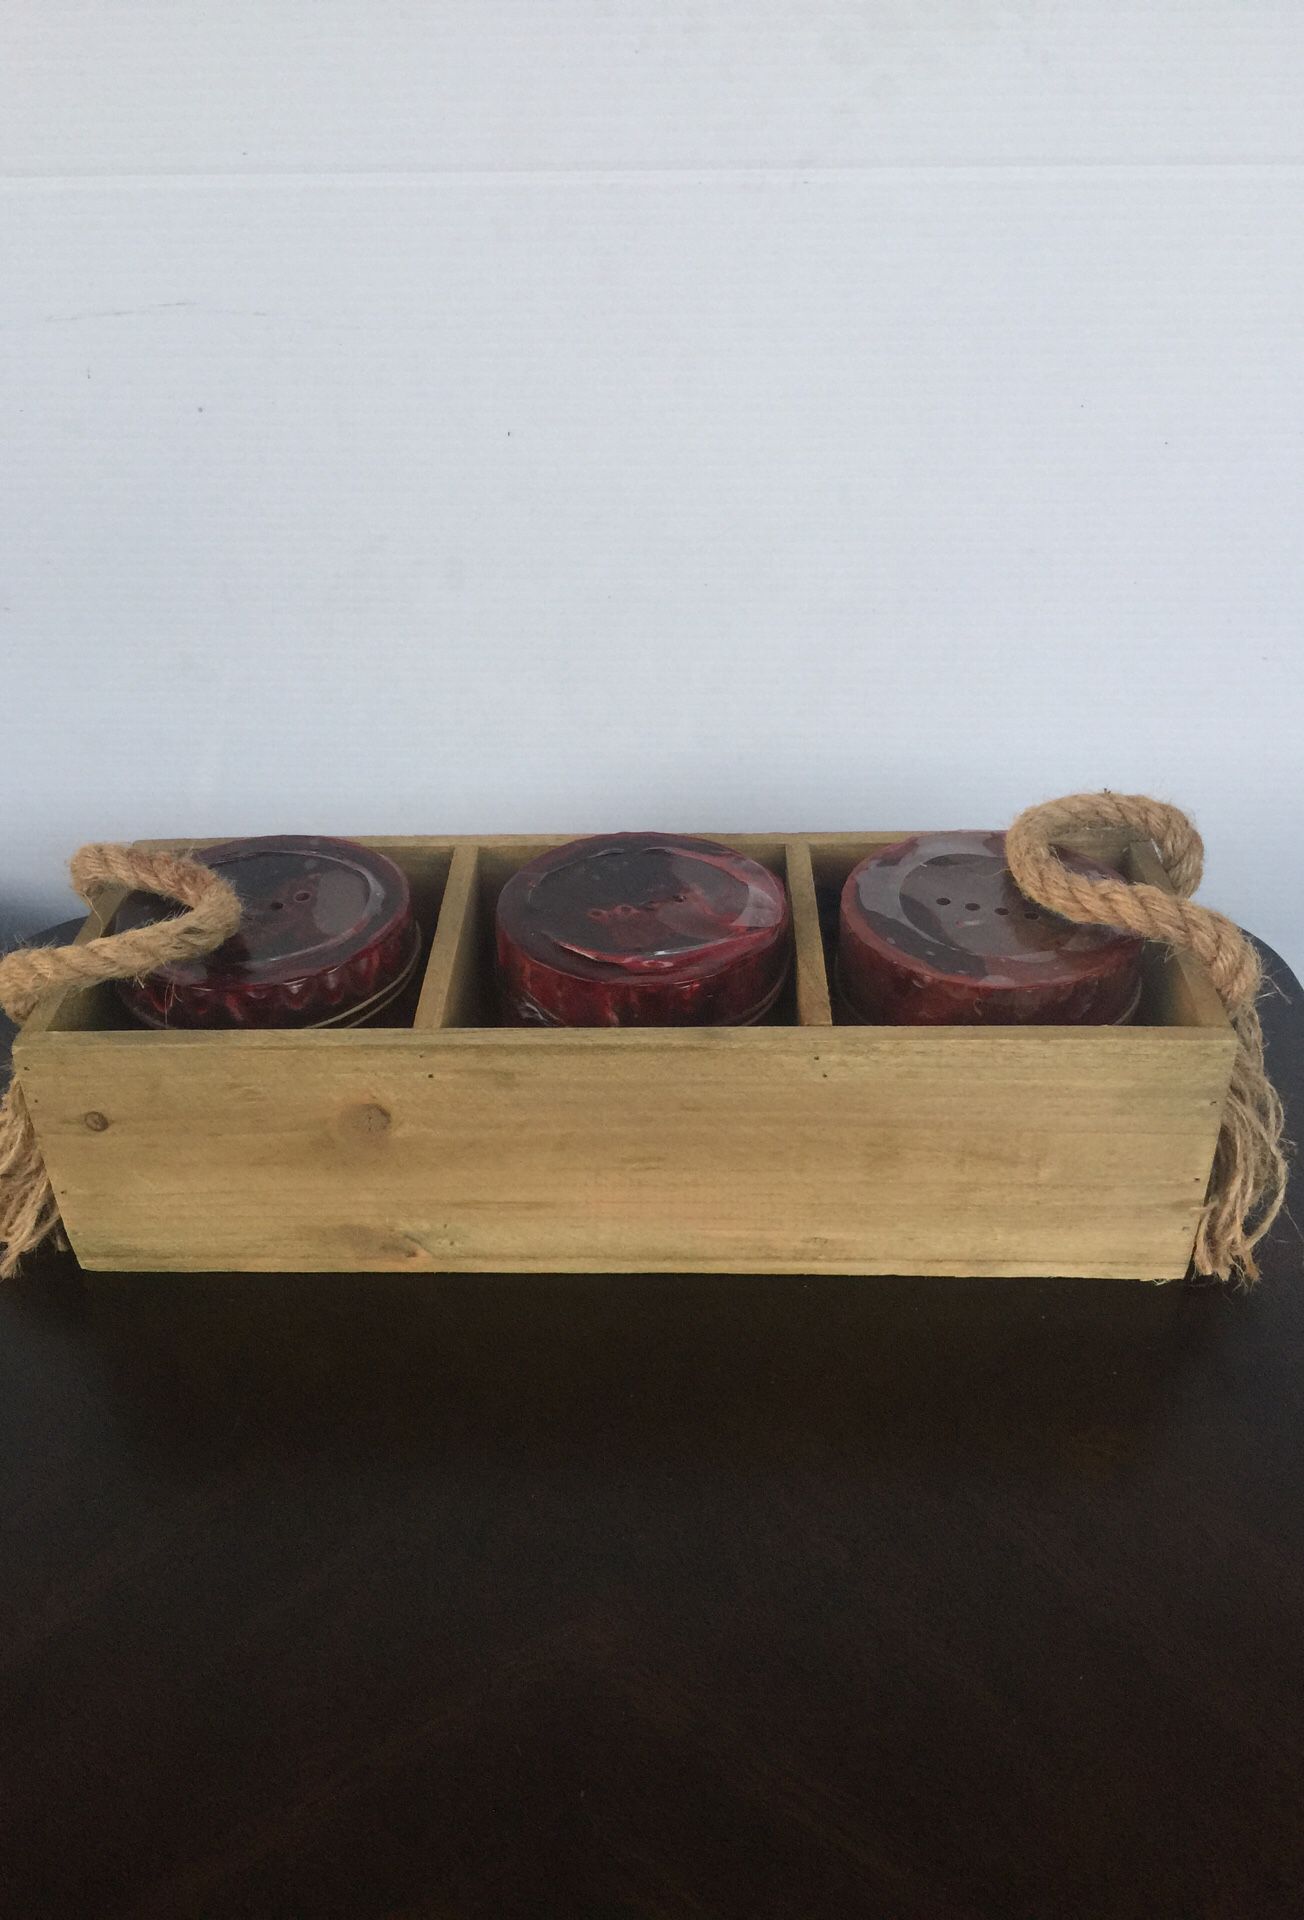 Wood Box With3 Candle Compartment - 4.5”H x 16”W x 5.5”D